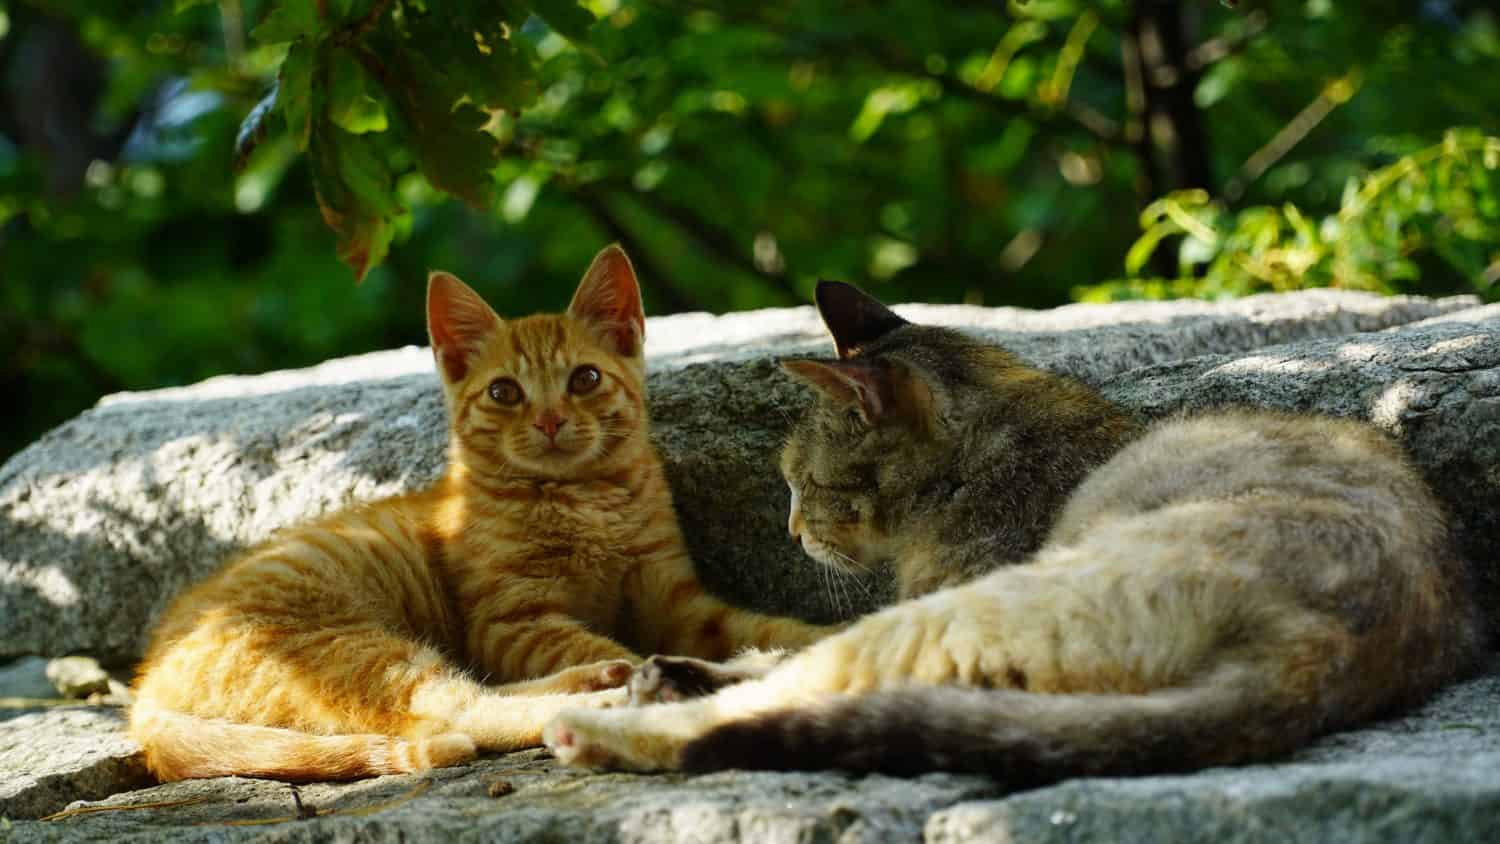                       The yellow Korean short haired little cat is resting with its mother. It looks like you're having a happy time with your mom's cat on the wall in the cool breeze.         